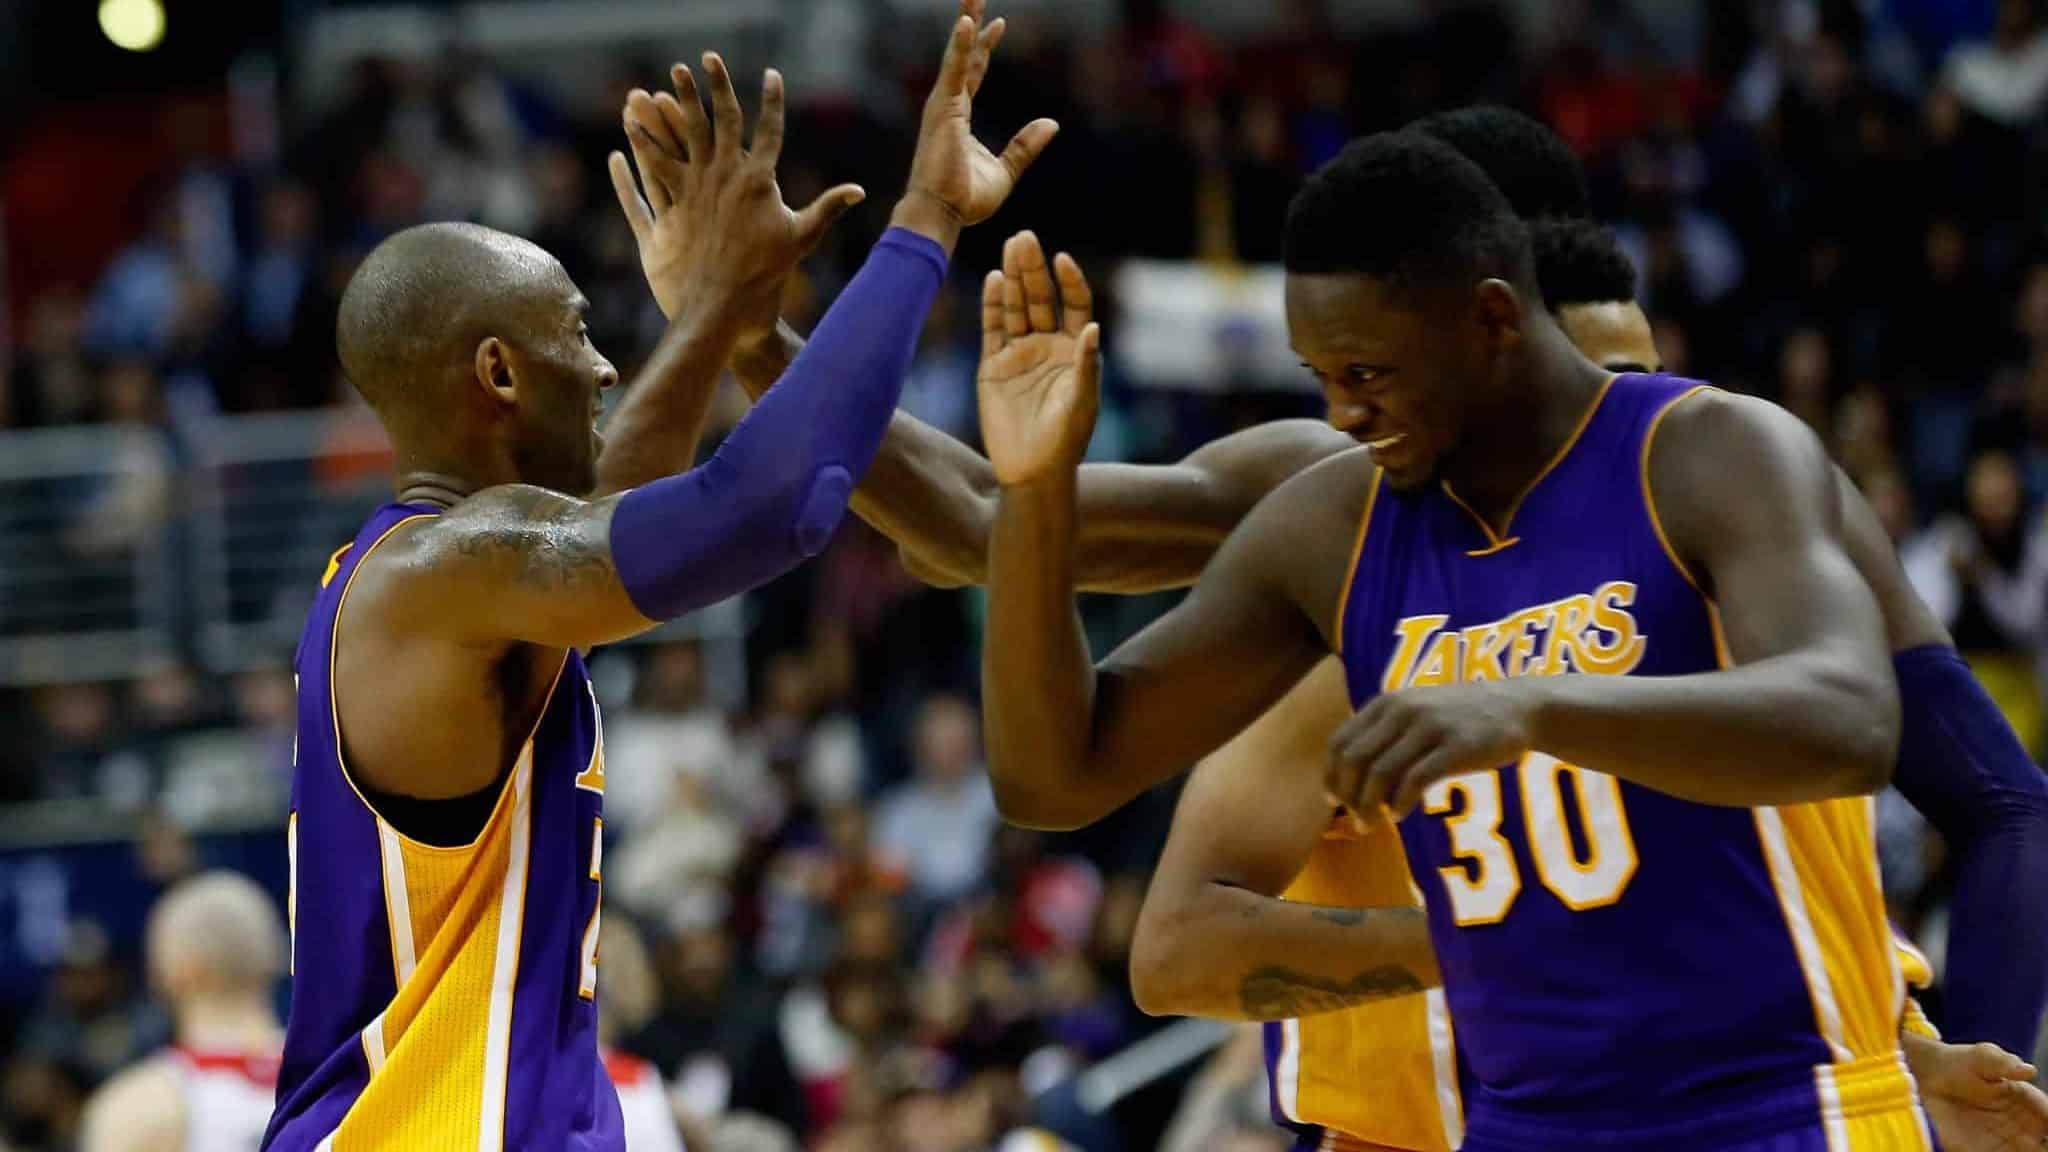 WASHINGTON, DC - DECEMBER 02: Kobe Bryant #24 of the Los Angeles Lakers celebrates with Julius Randle #30 during a timeout in the second half against the Washington Wizards at Verizon Center on December 2, 2015 in Washington, DC. NOTE TO USER: User expressly acknowledges and agrees that, by downloading and or using this photograph, User is consenting to the terms and conditions of the Getty Images License Agreement.